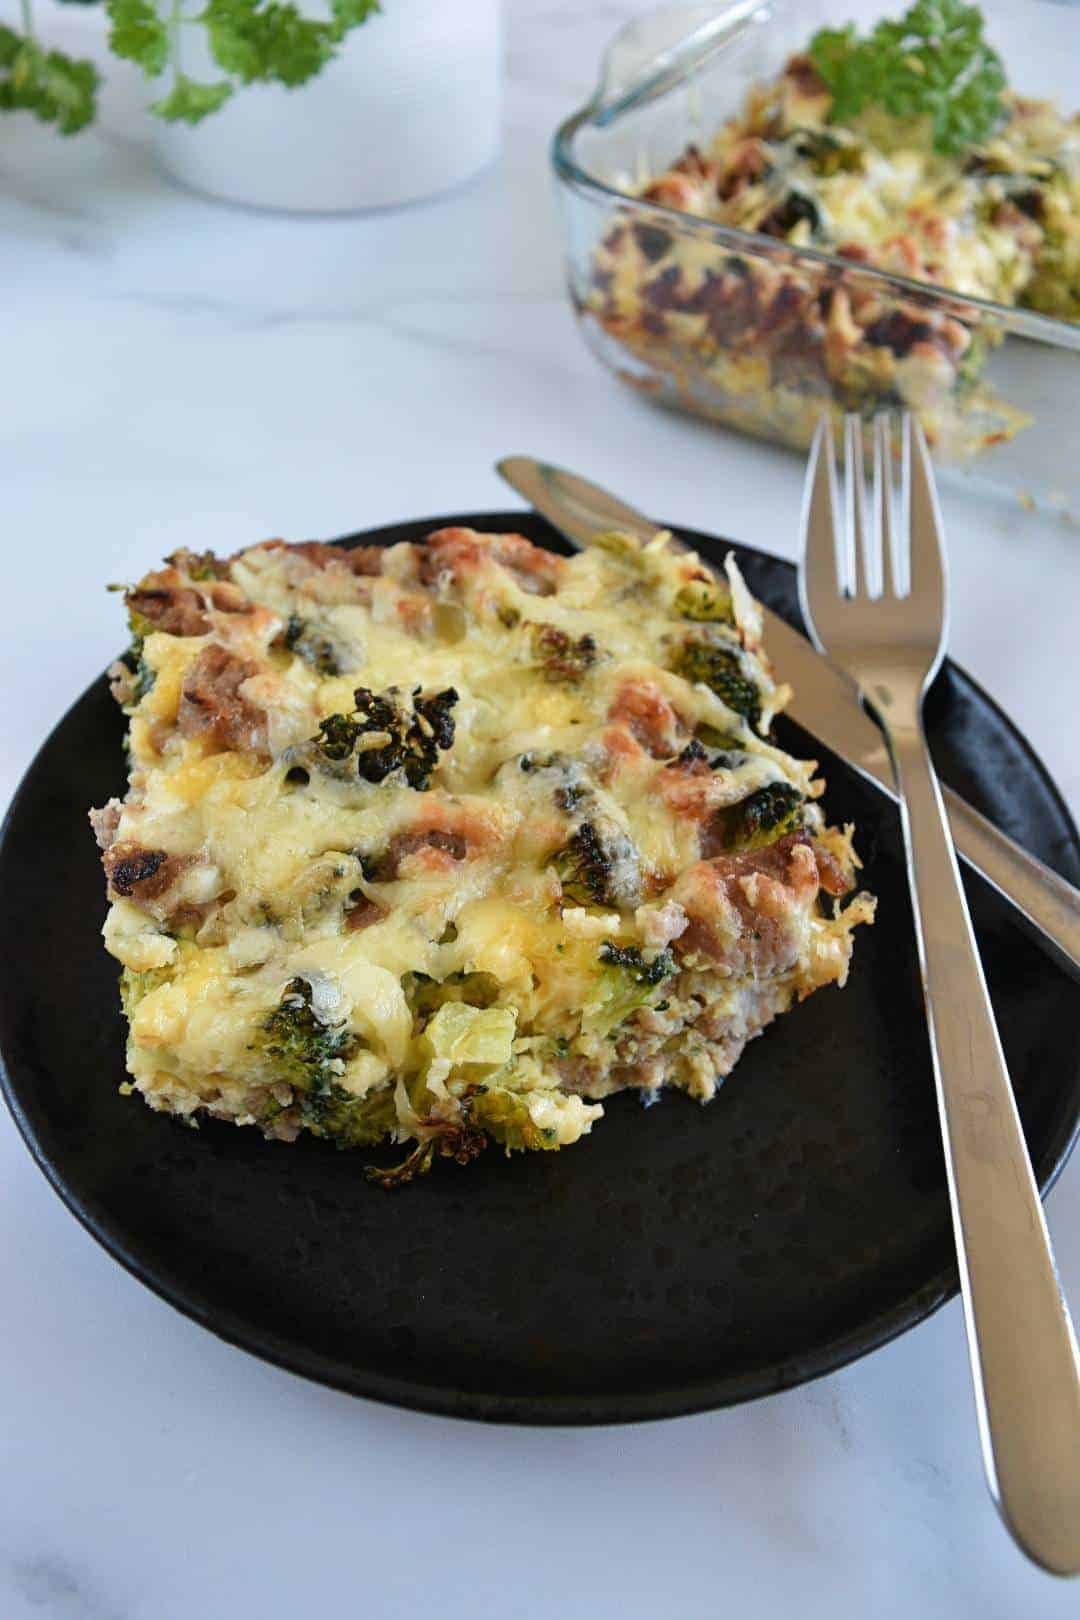 Breakfast casserole with sausage and broccoli on a black plate with cutlery.